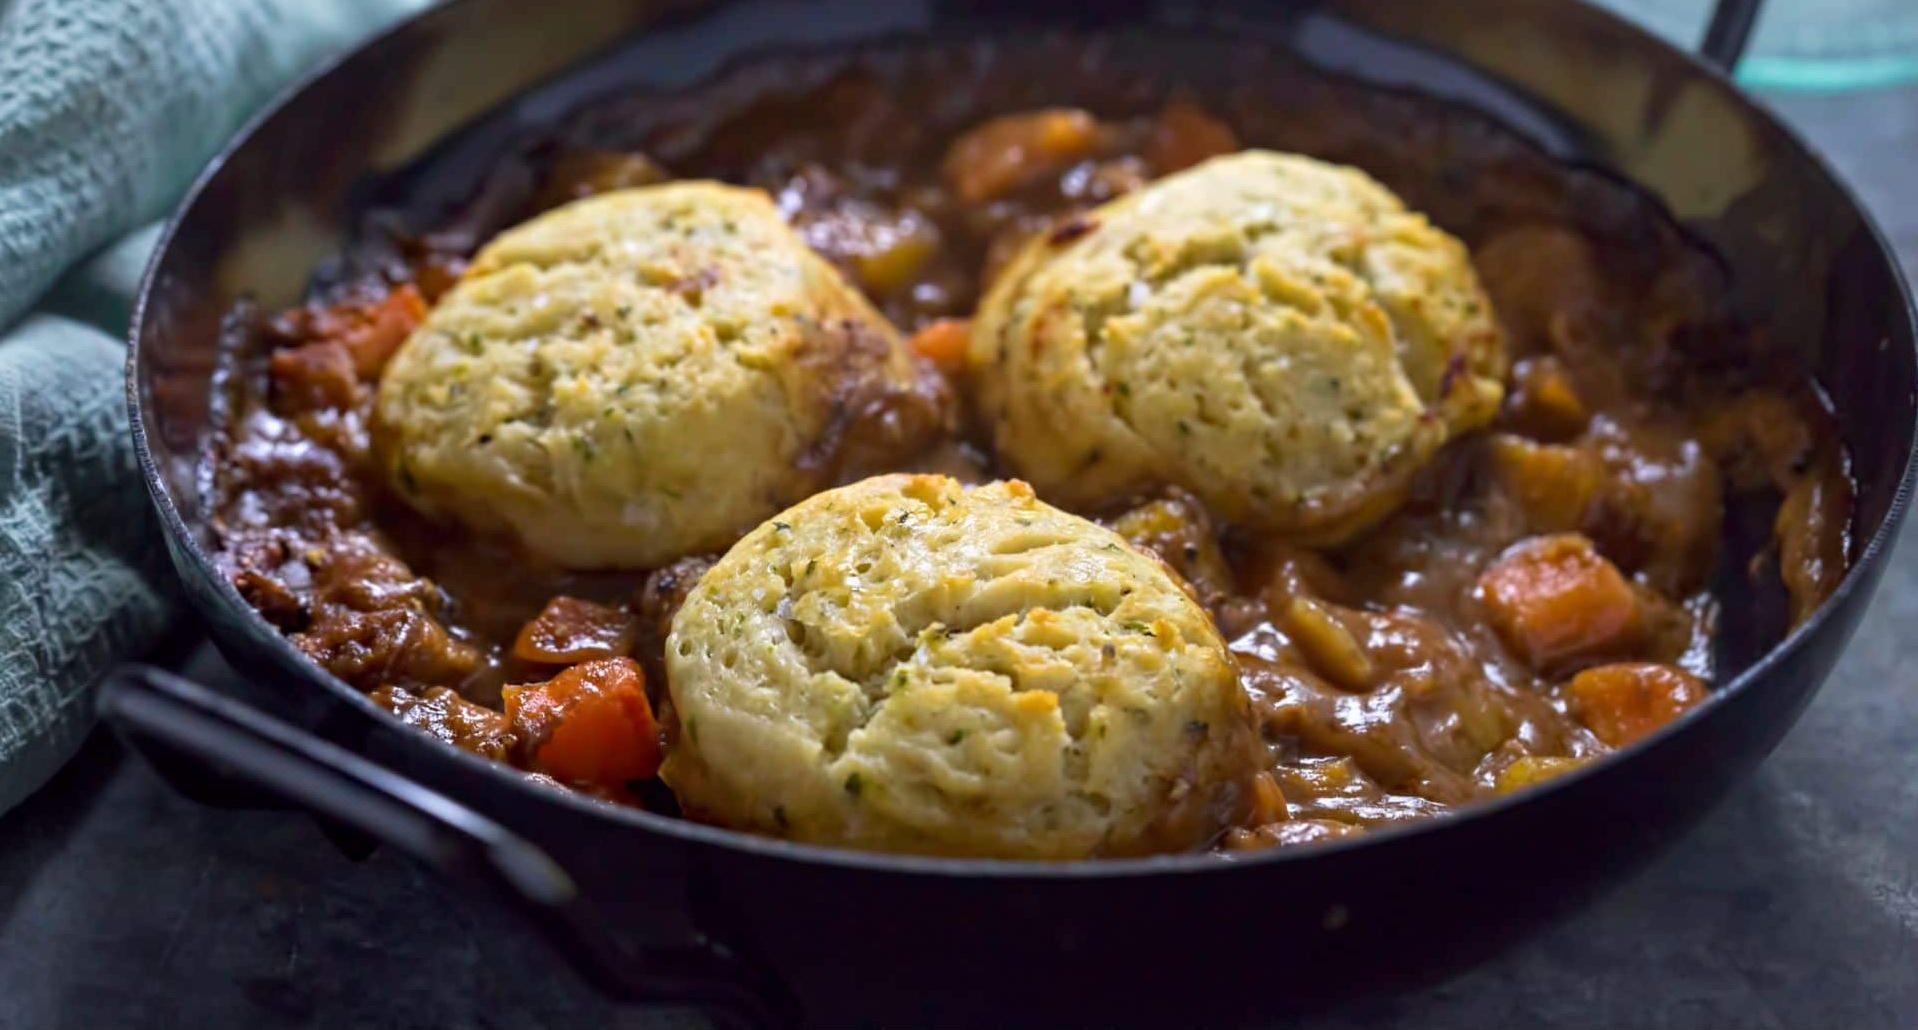 • This dish is bursting with flavors of tender lamb, root vegetables, and a touch of Guinness.